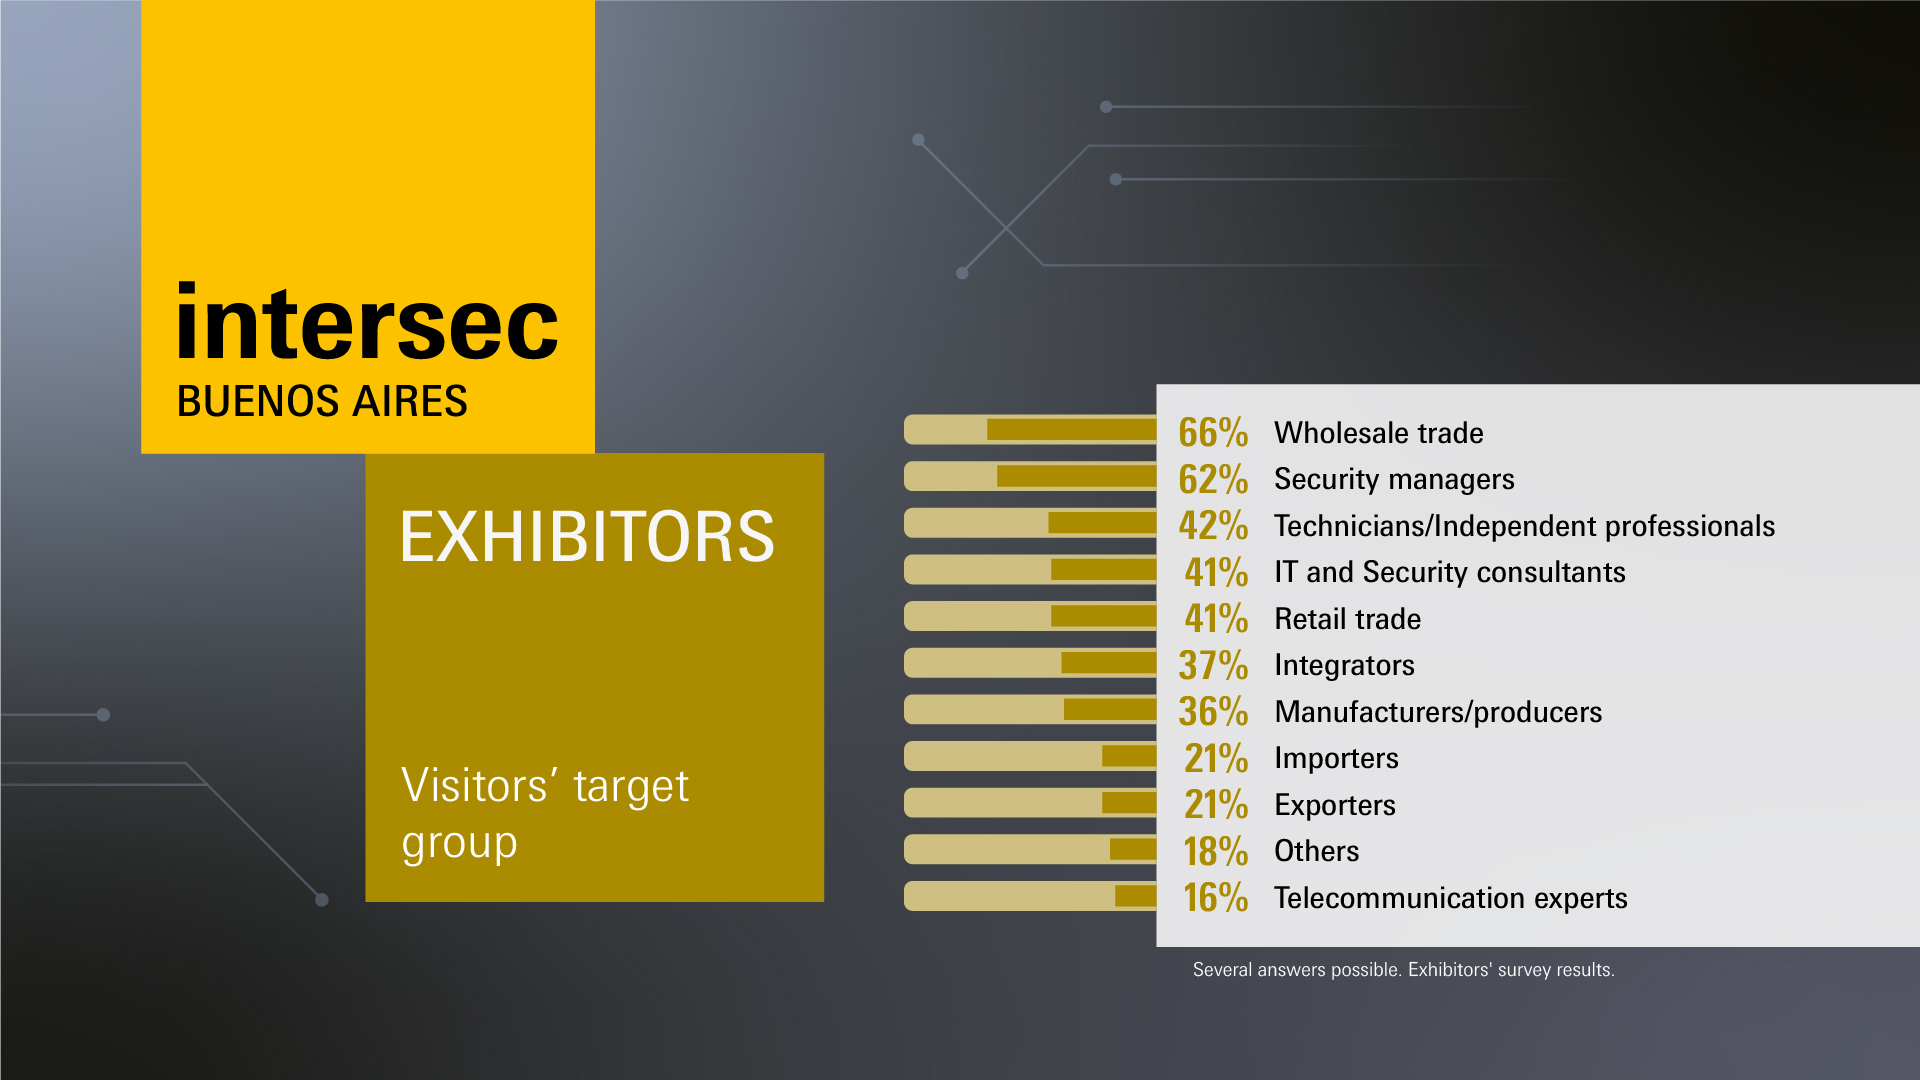 Intersec Buenos Aires: Exhibitors - Target group